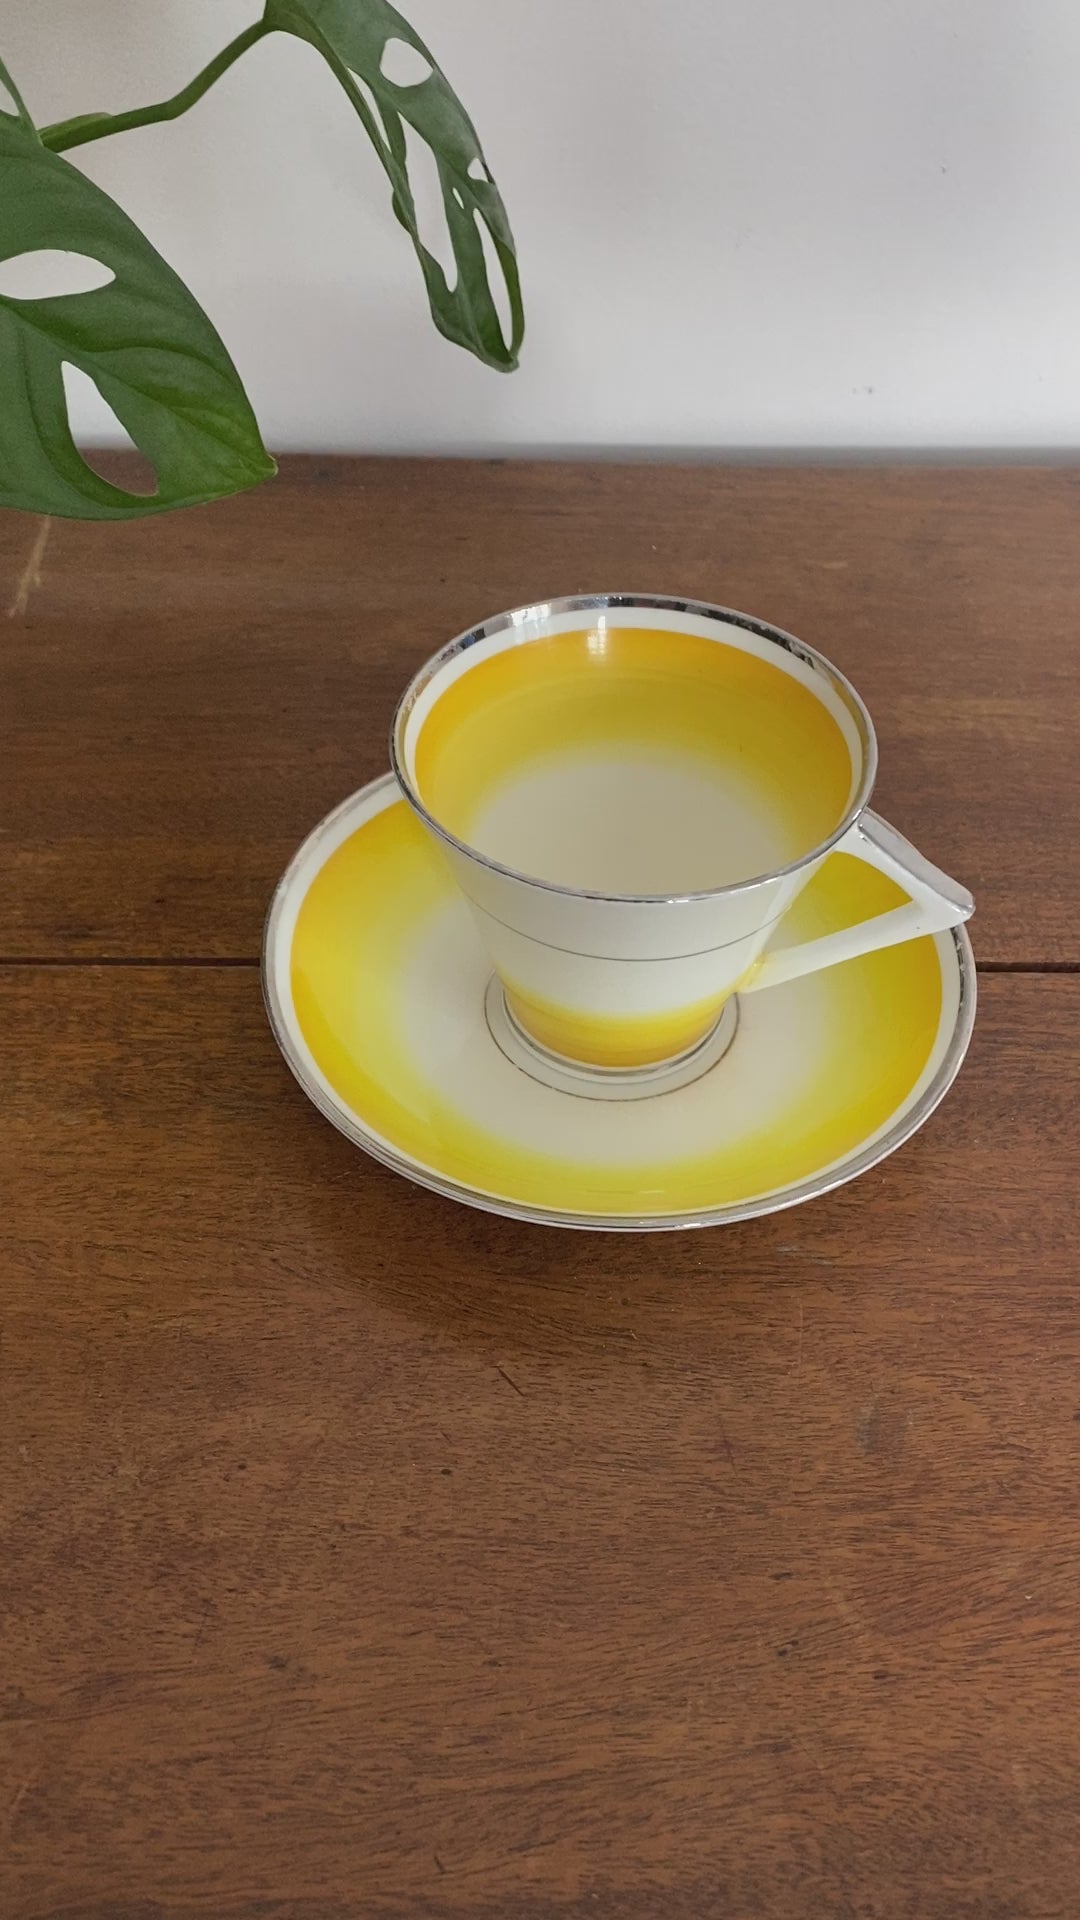 Video of Gladstone teacup with triangle/angular handle. Colour is a bright yellow that fades into the white. Rims of silver or white gold appear on cup. 